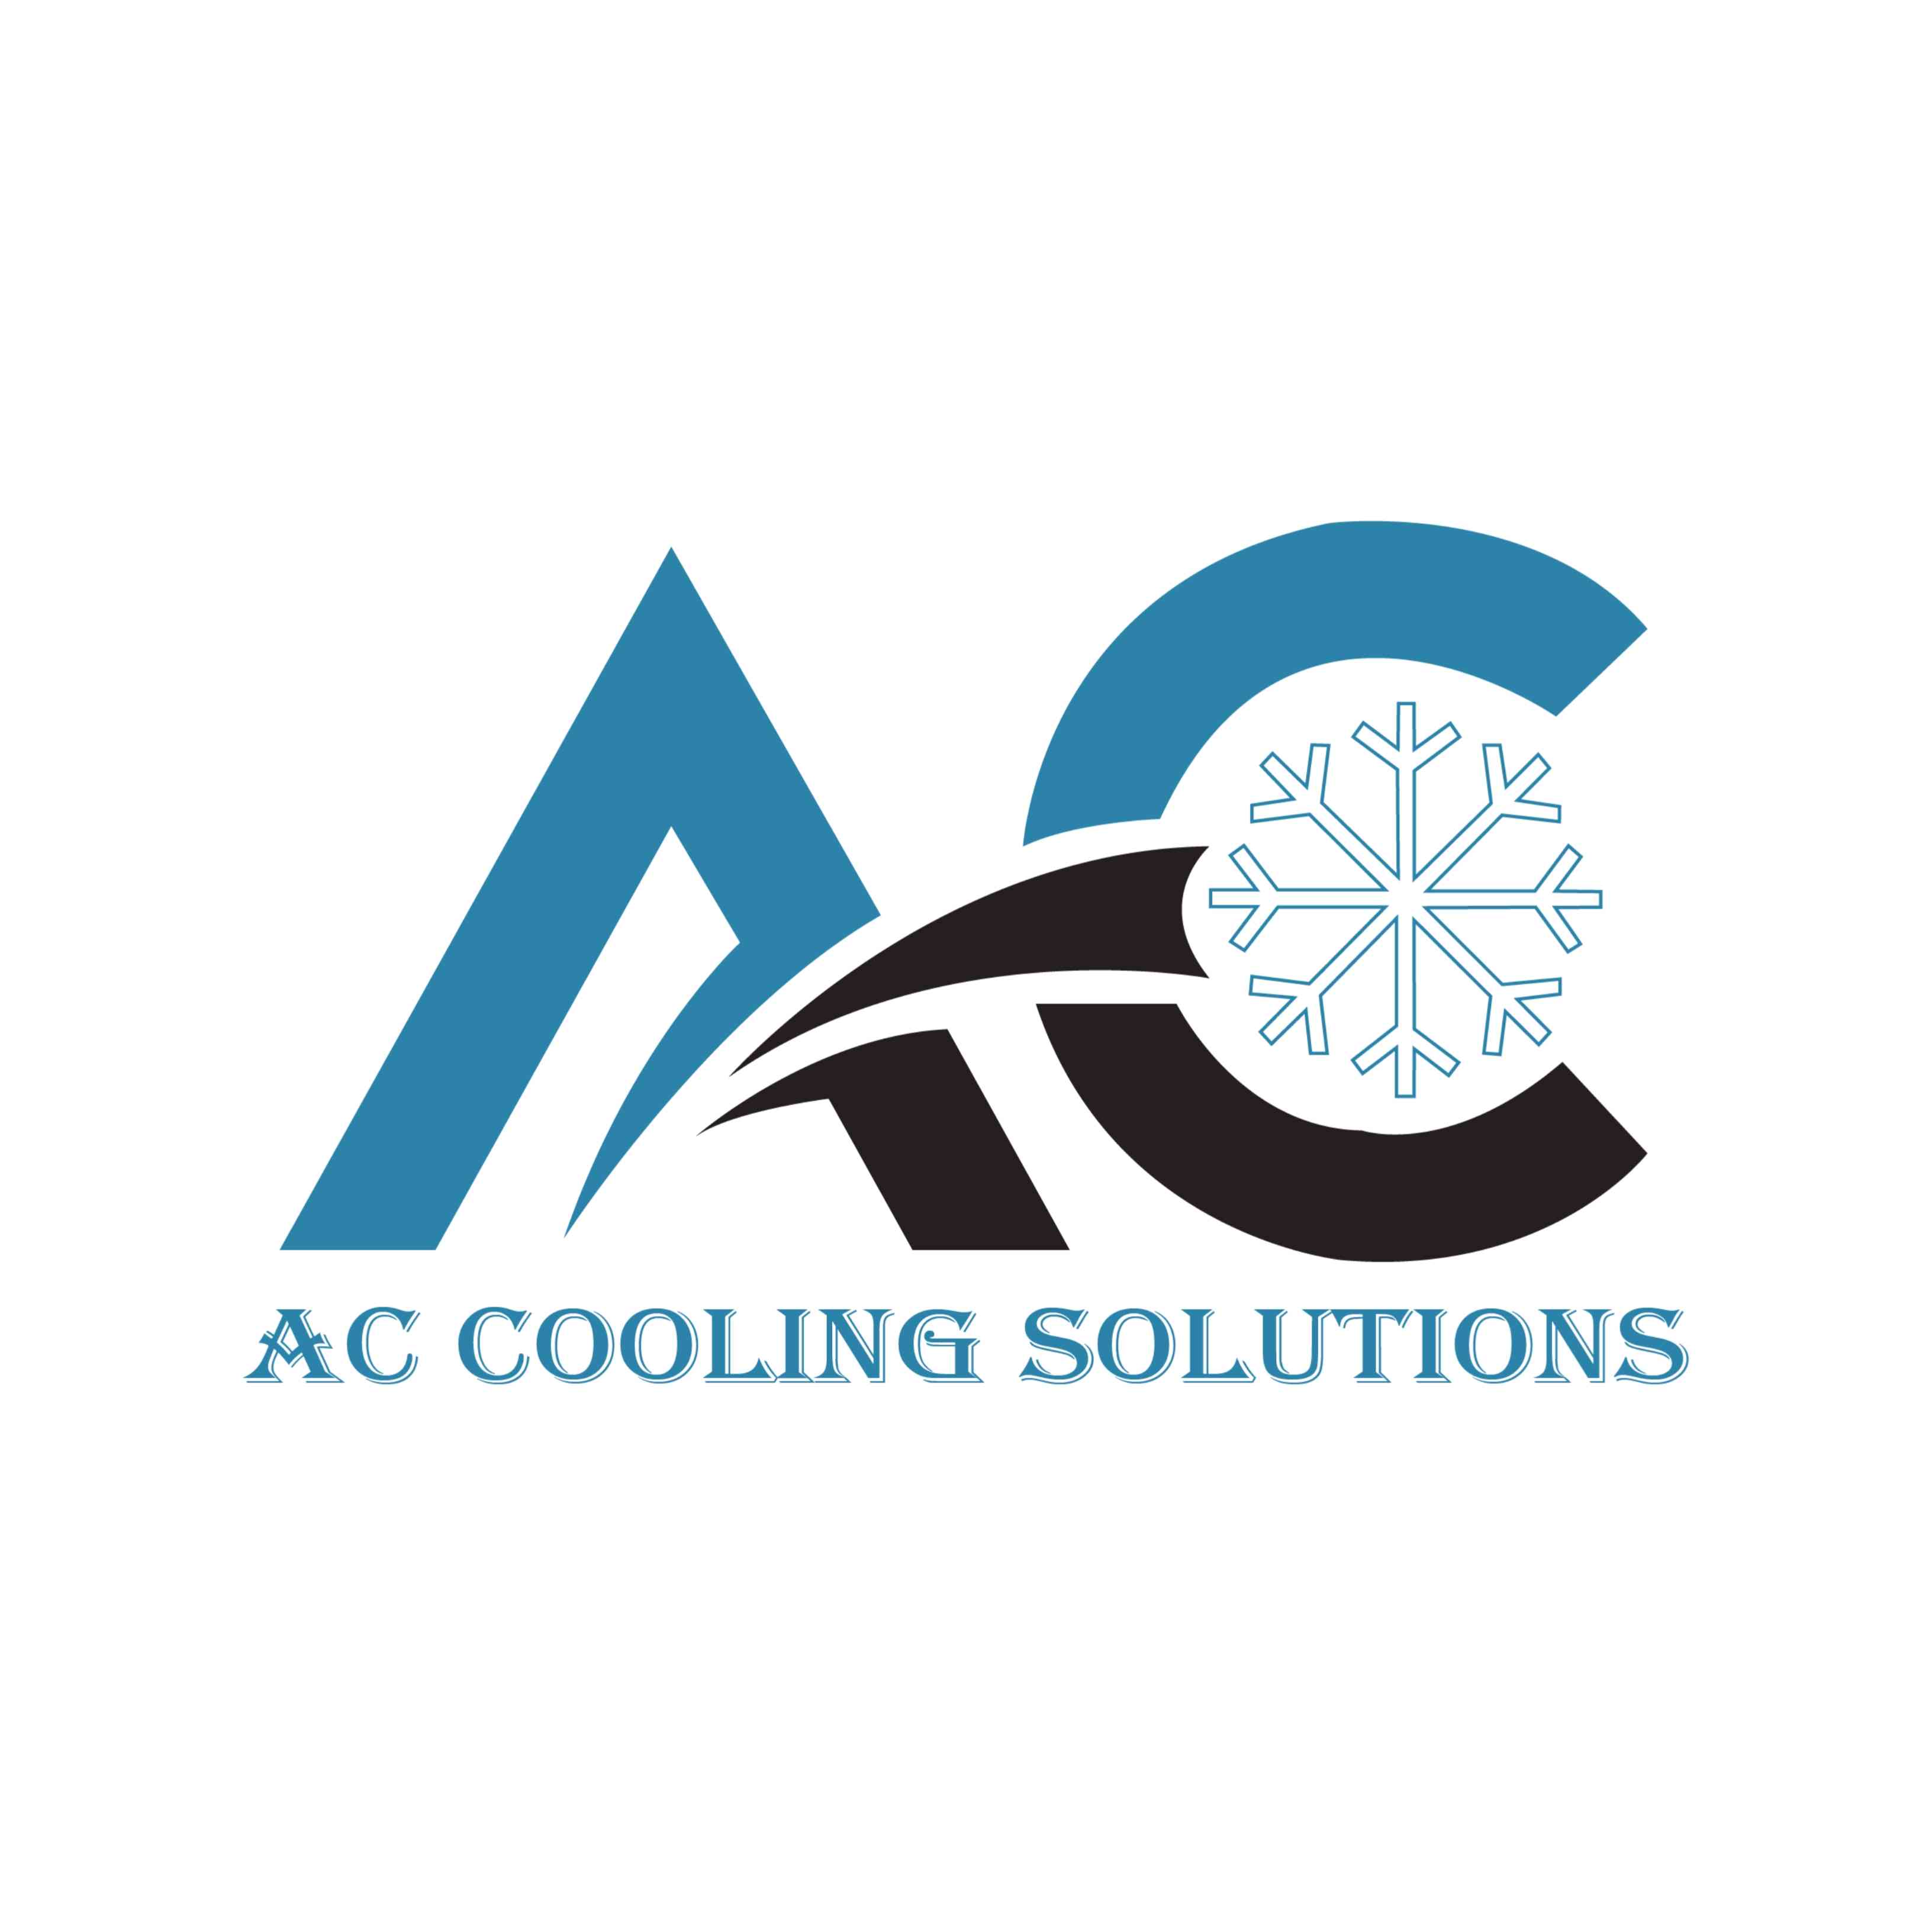 AC Cooling Solutions